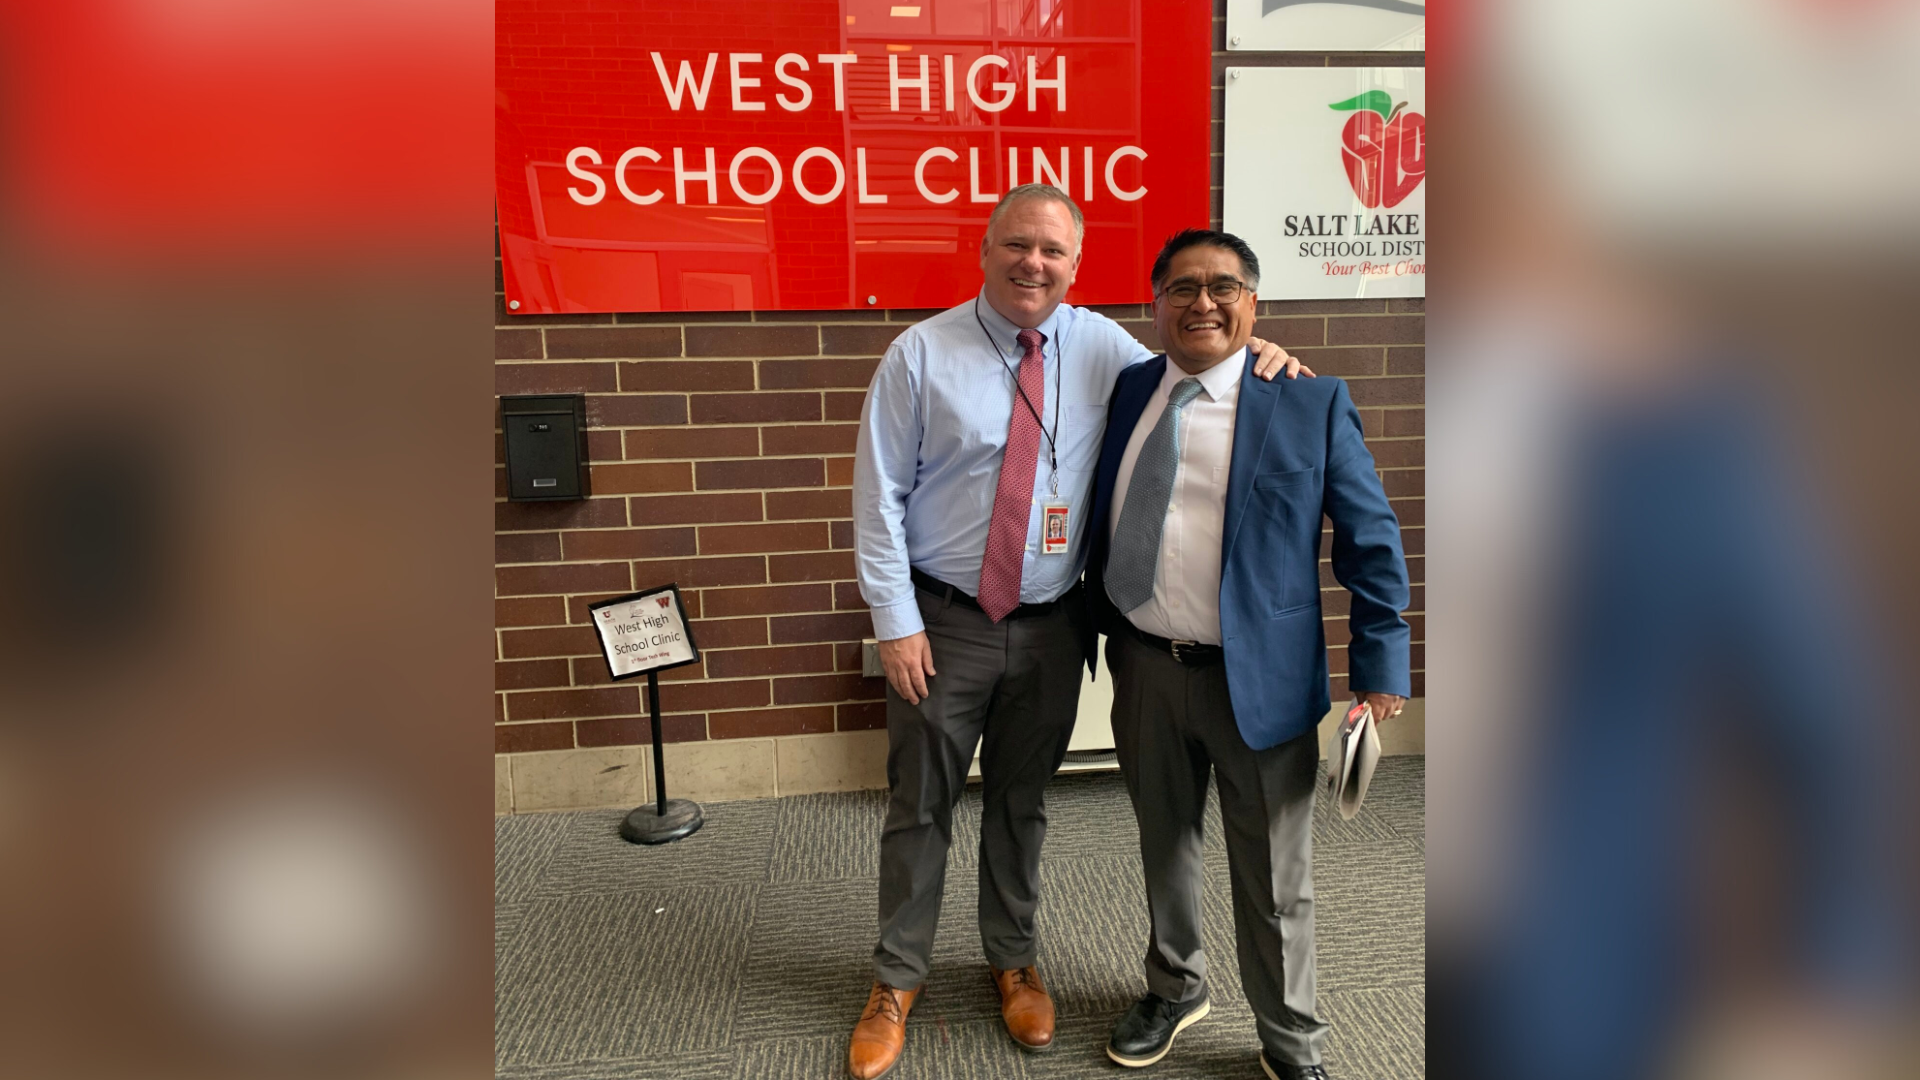 A look inside the West High School Clinic [Video]